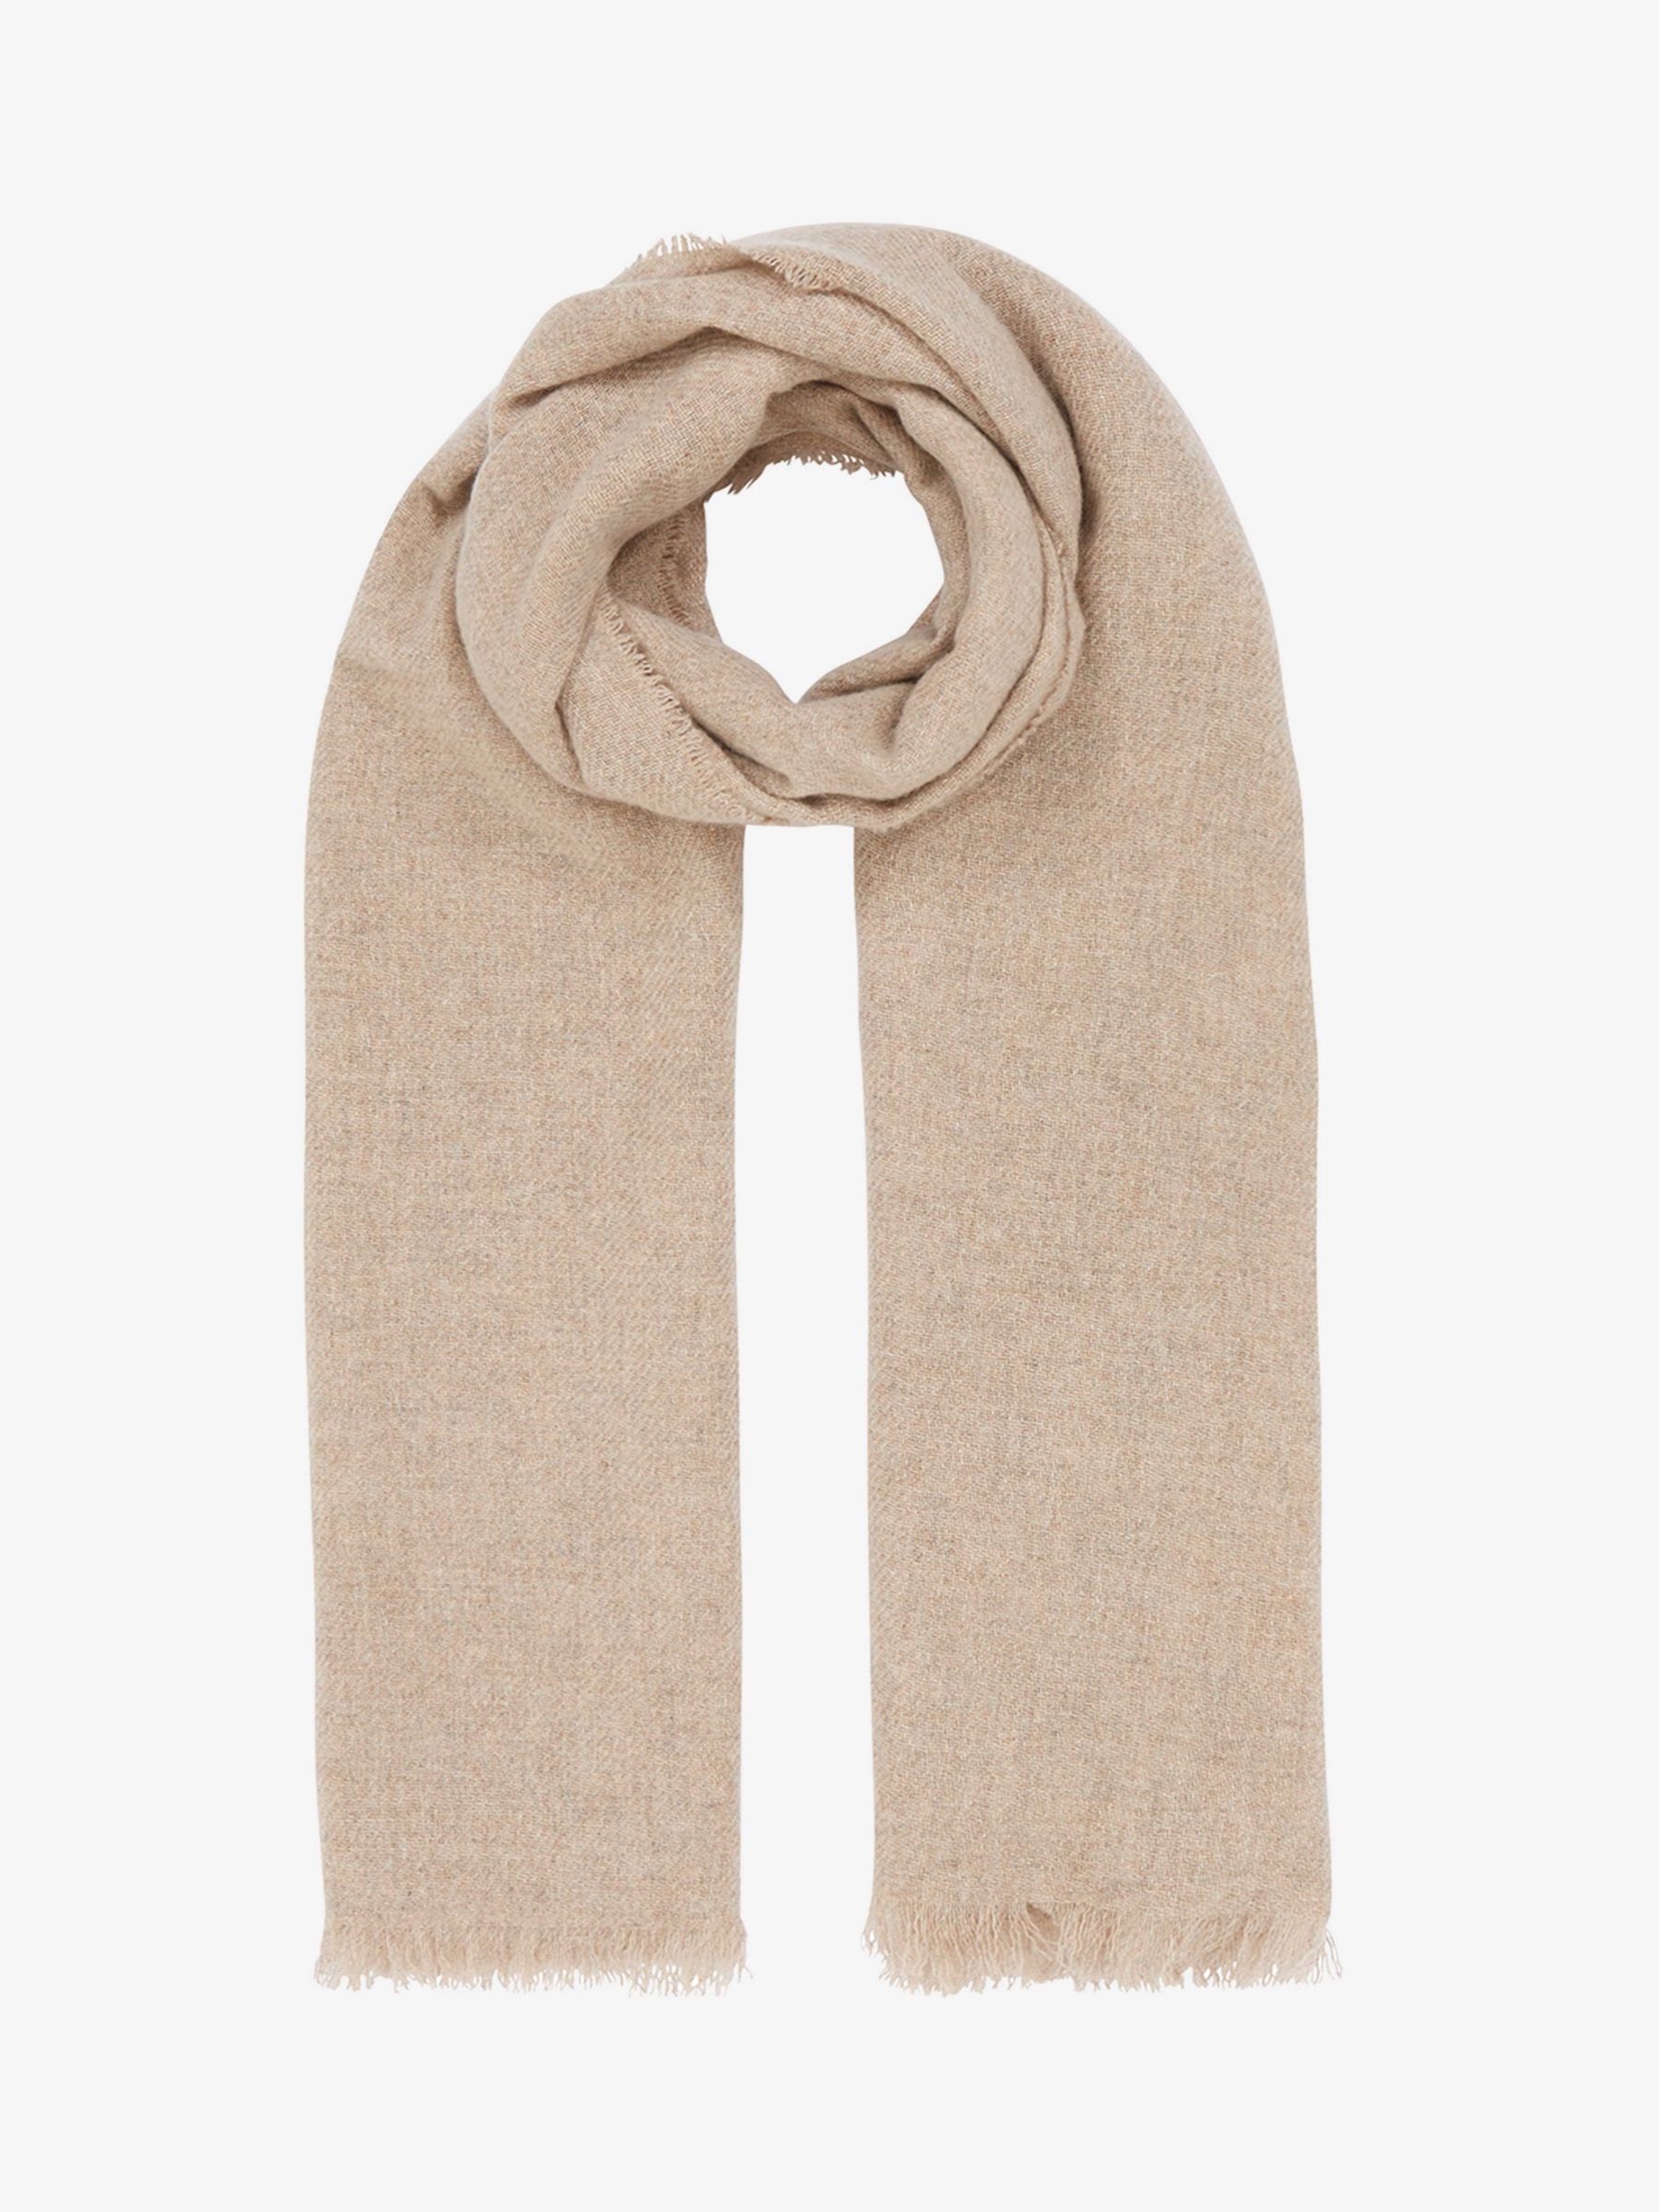 Brora Cashmere Stole Scarf, Oatmeal, One Size